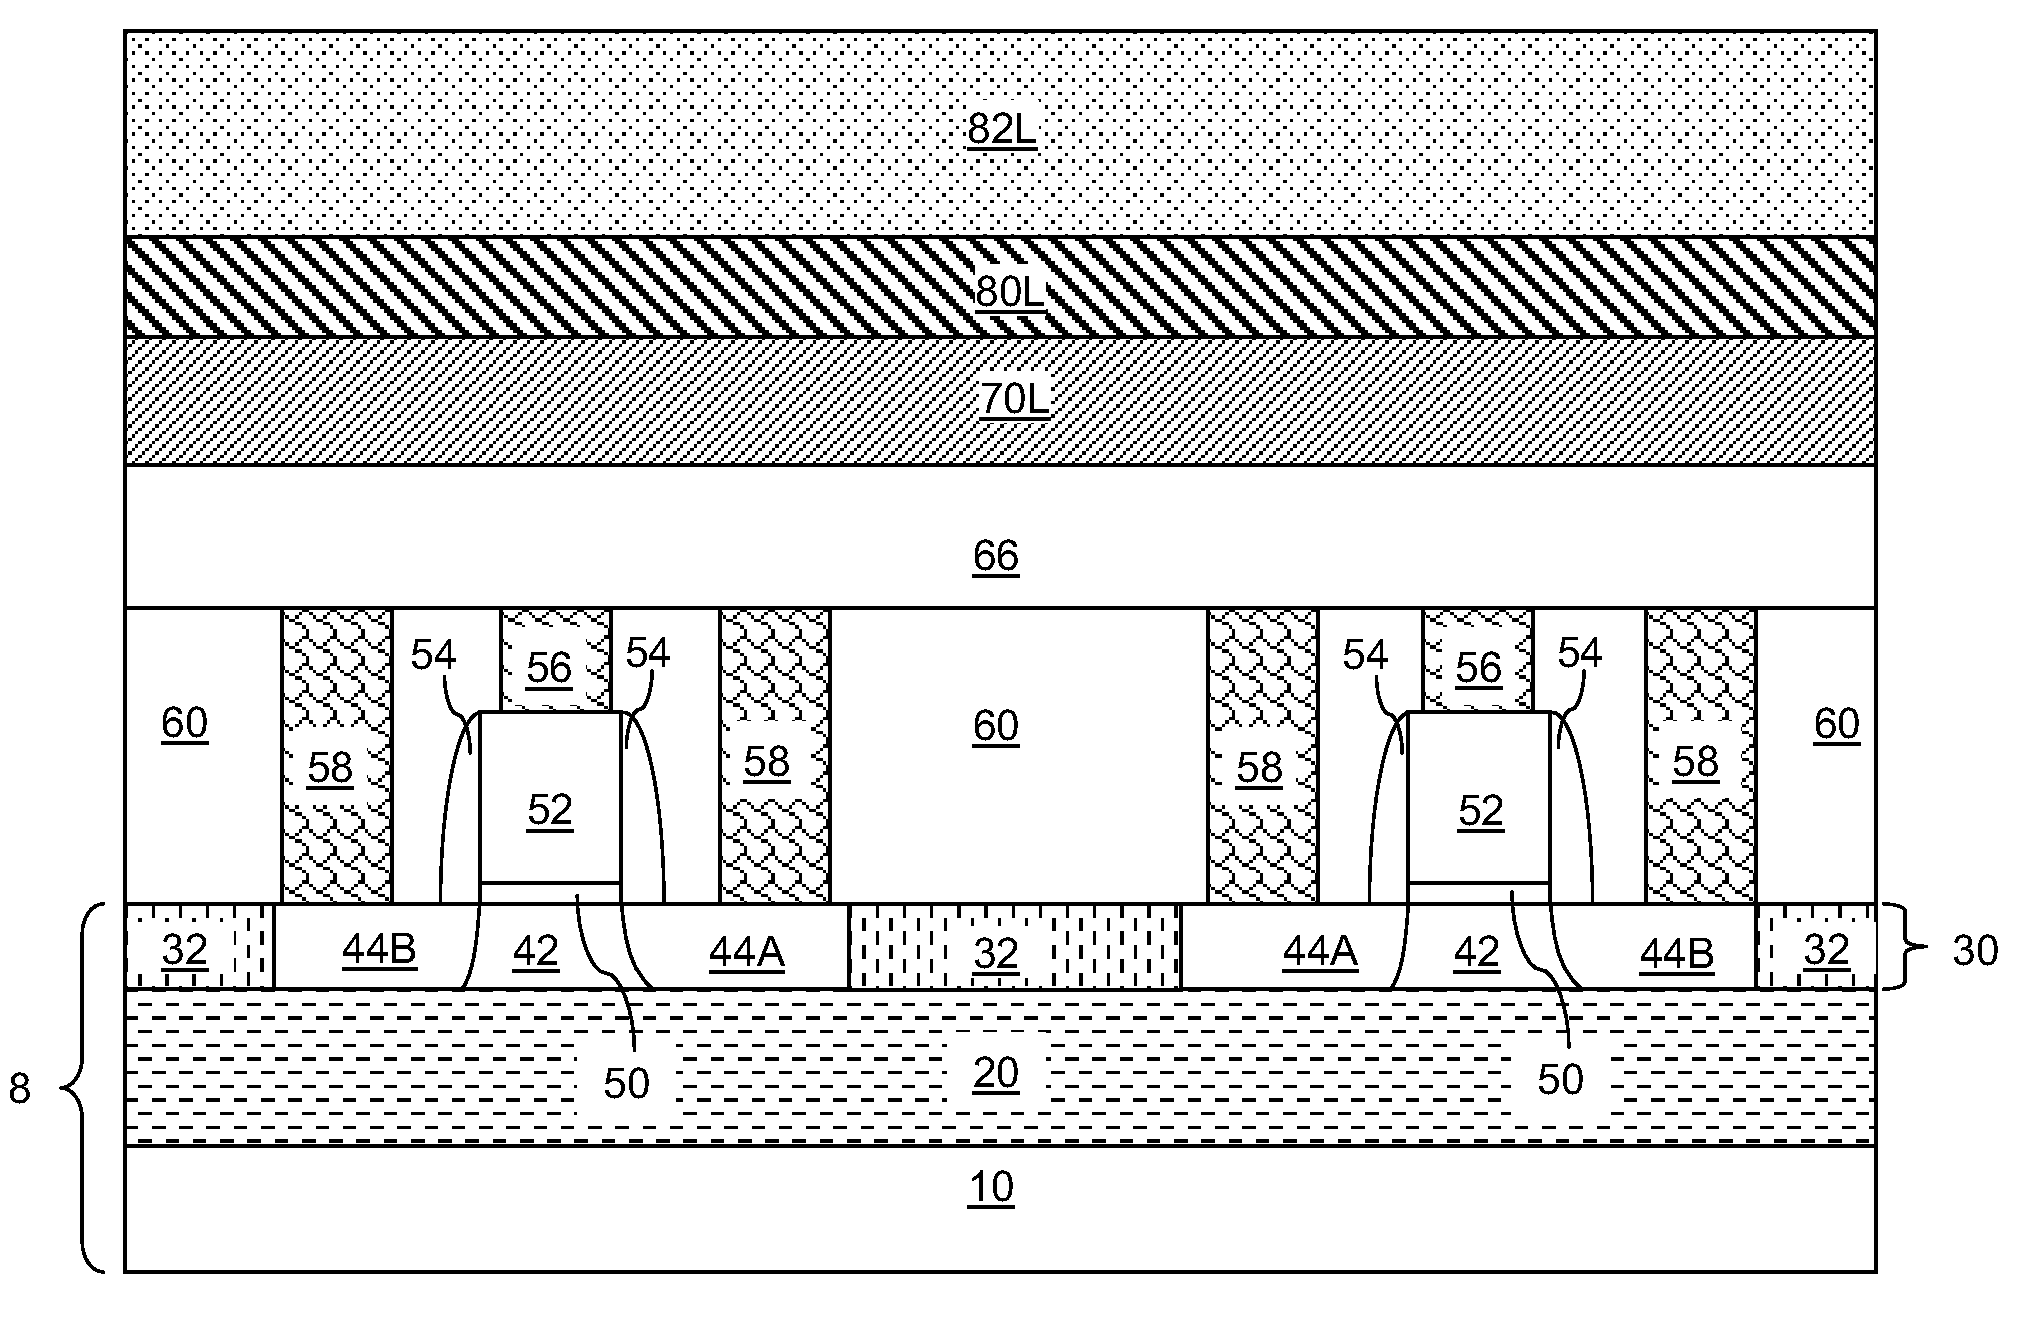 Multi-exposure lithography employing a single Anti-reflective coating layer